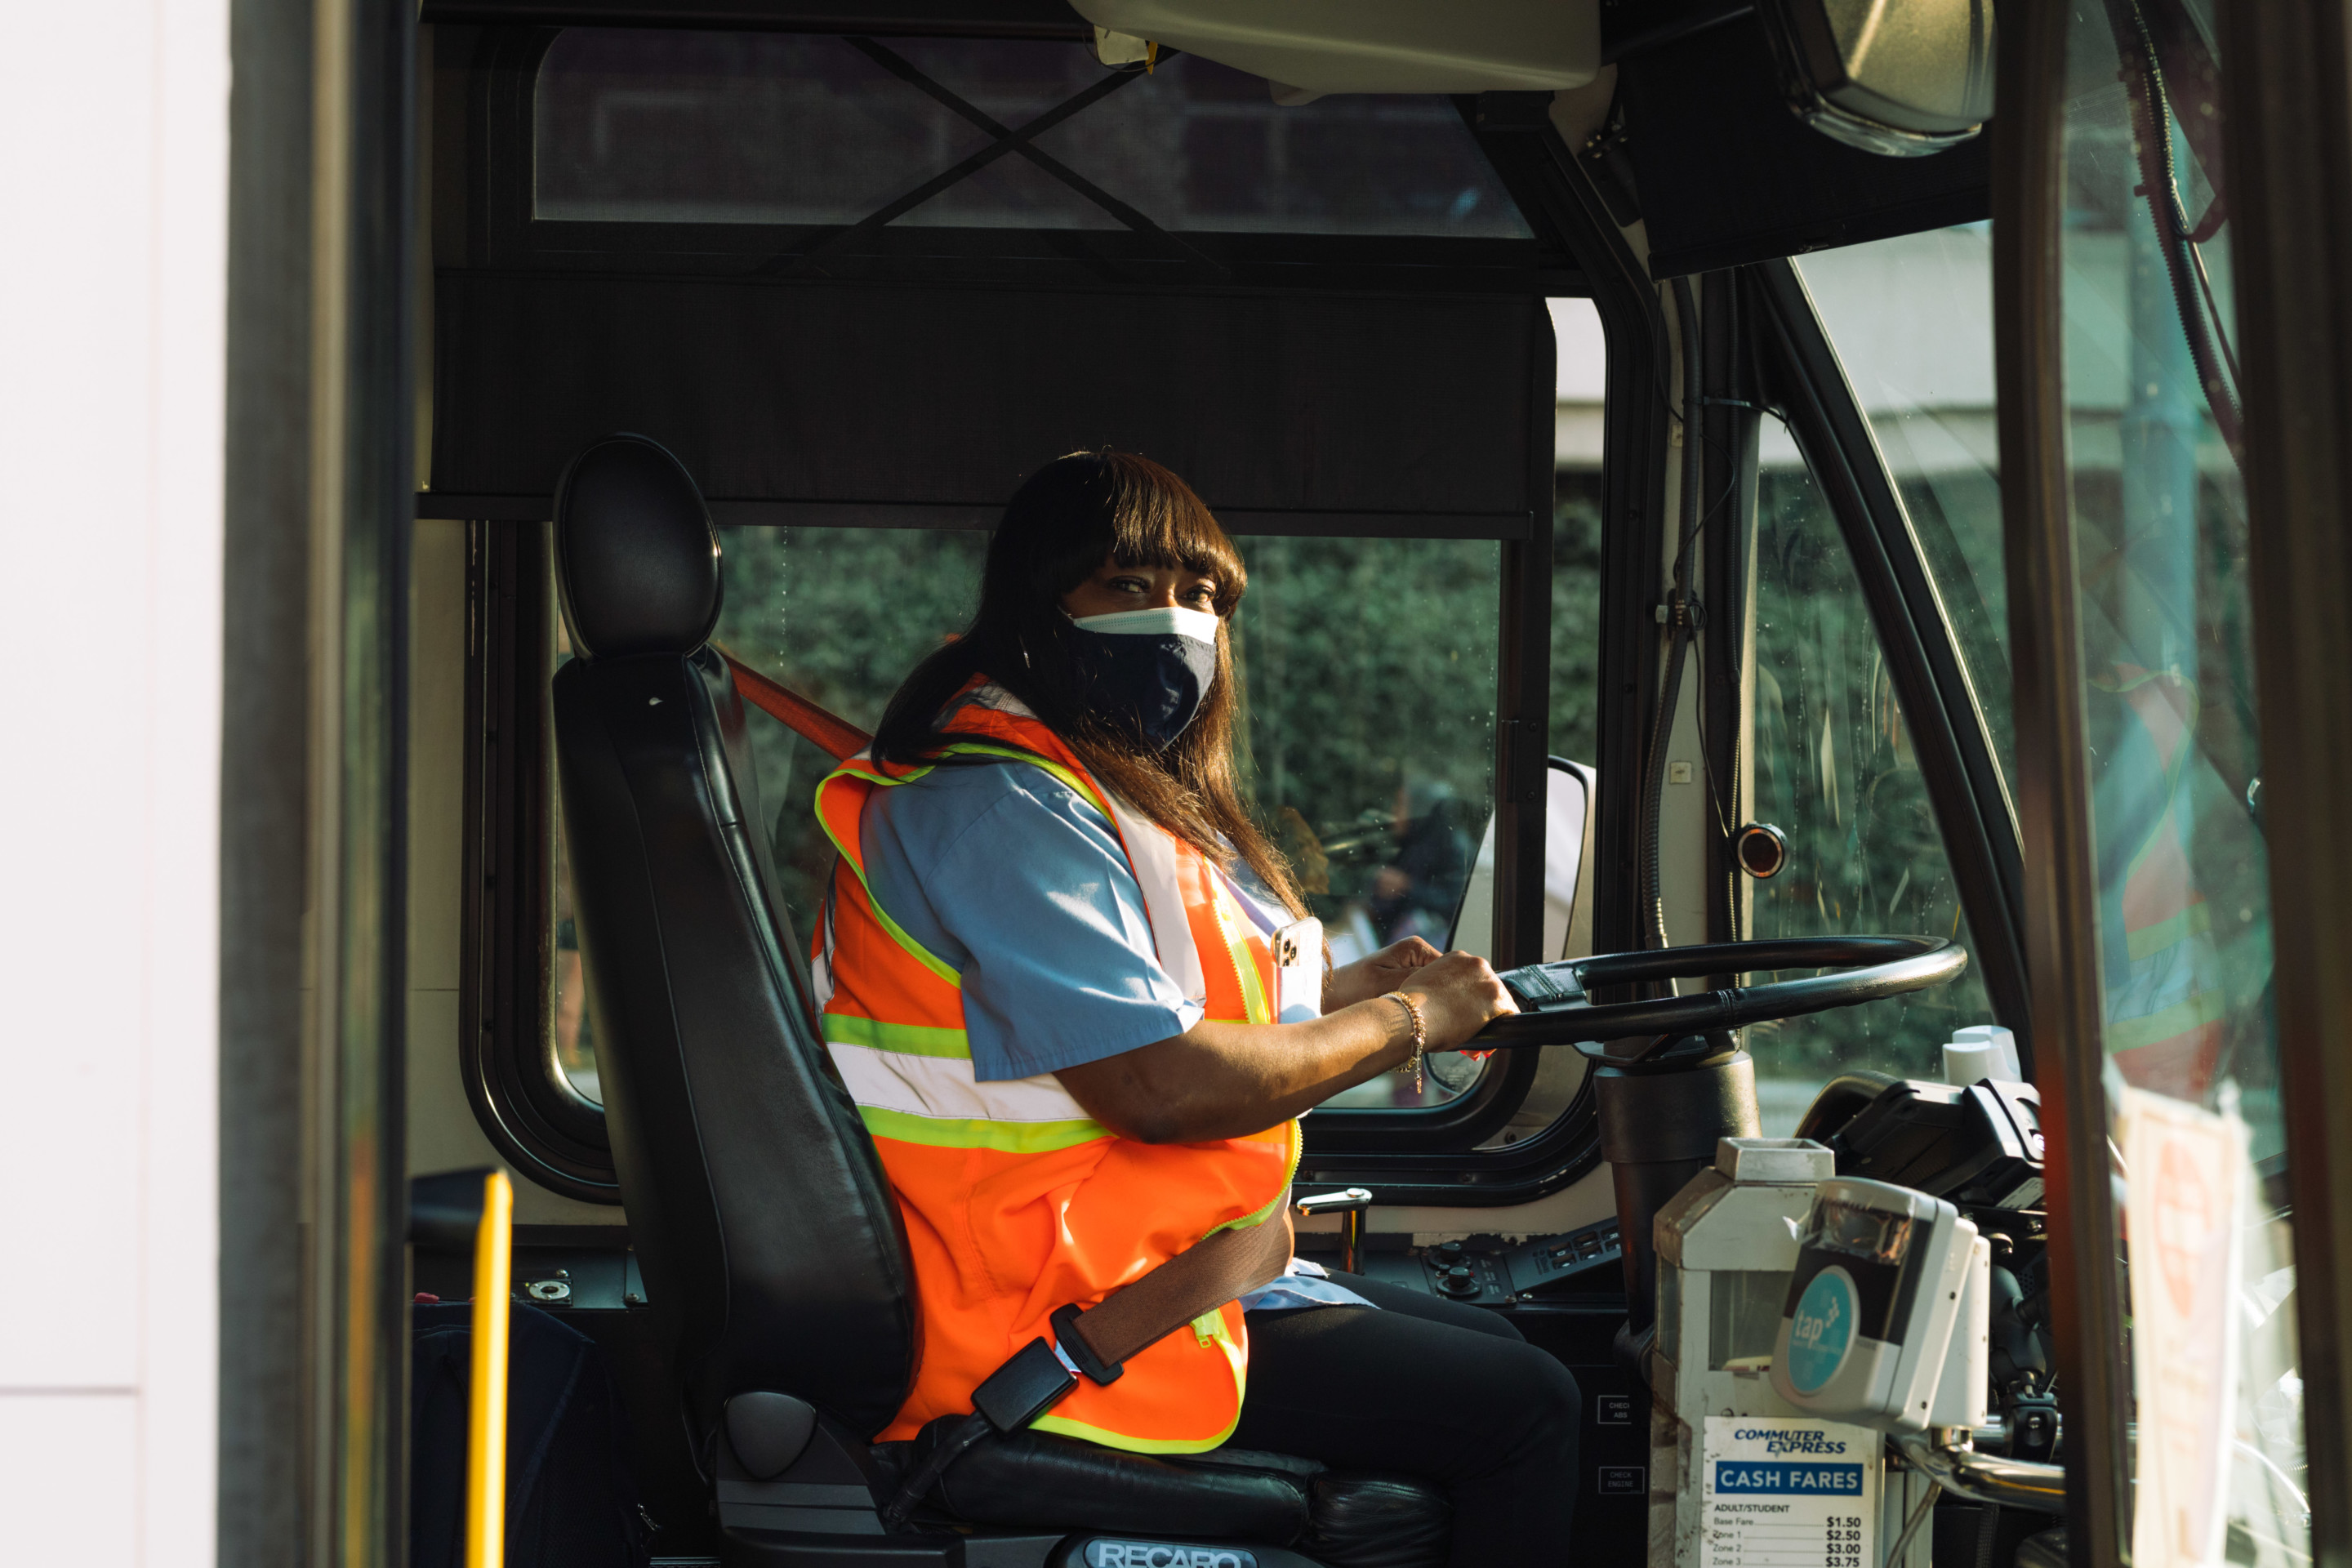 A los angeles bus driver with a high vis vest